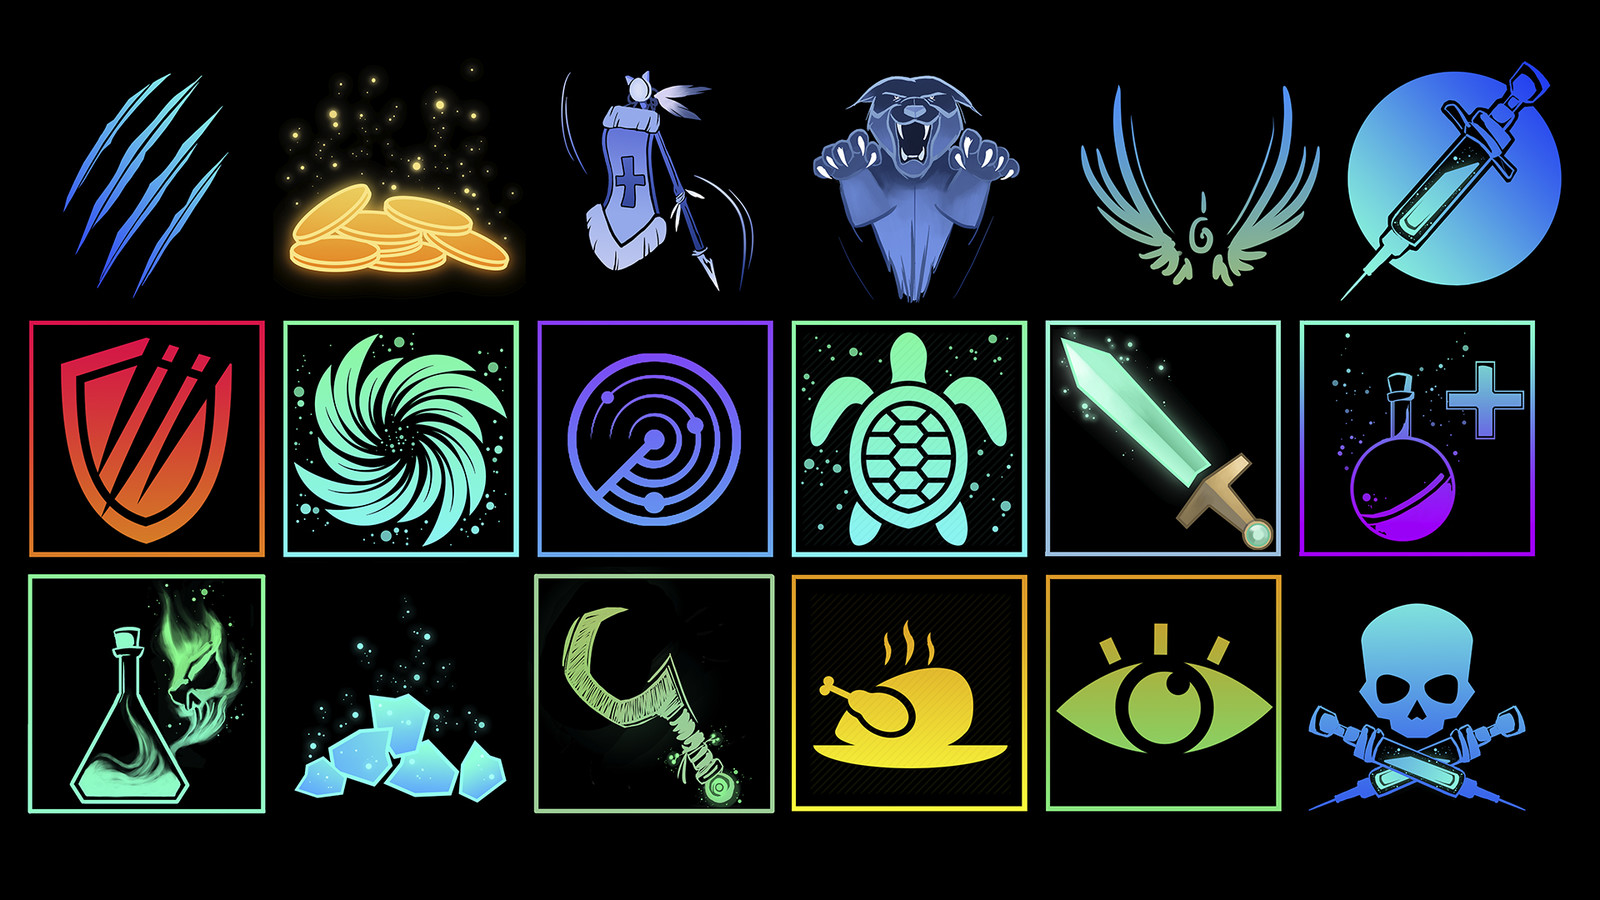 Ability icons